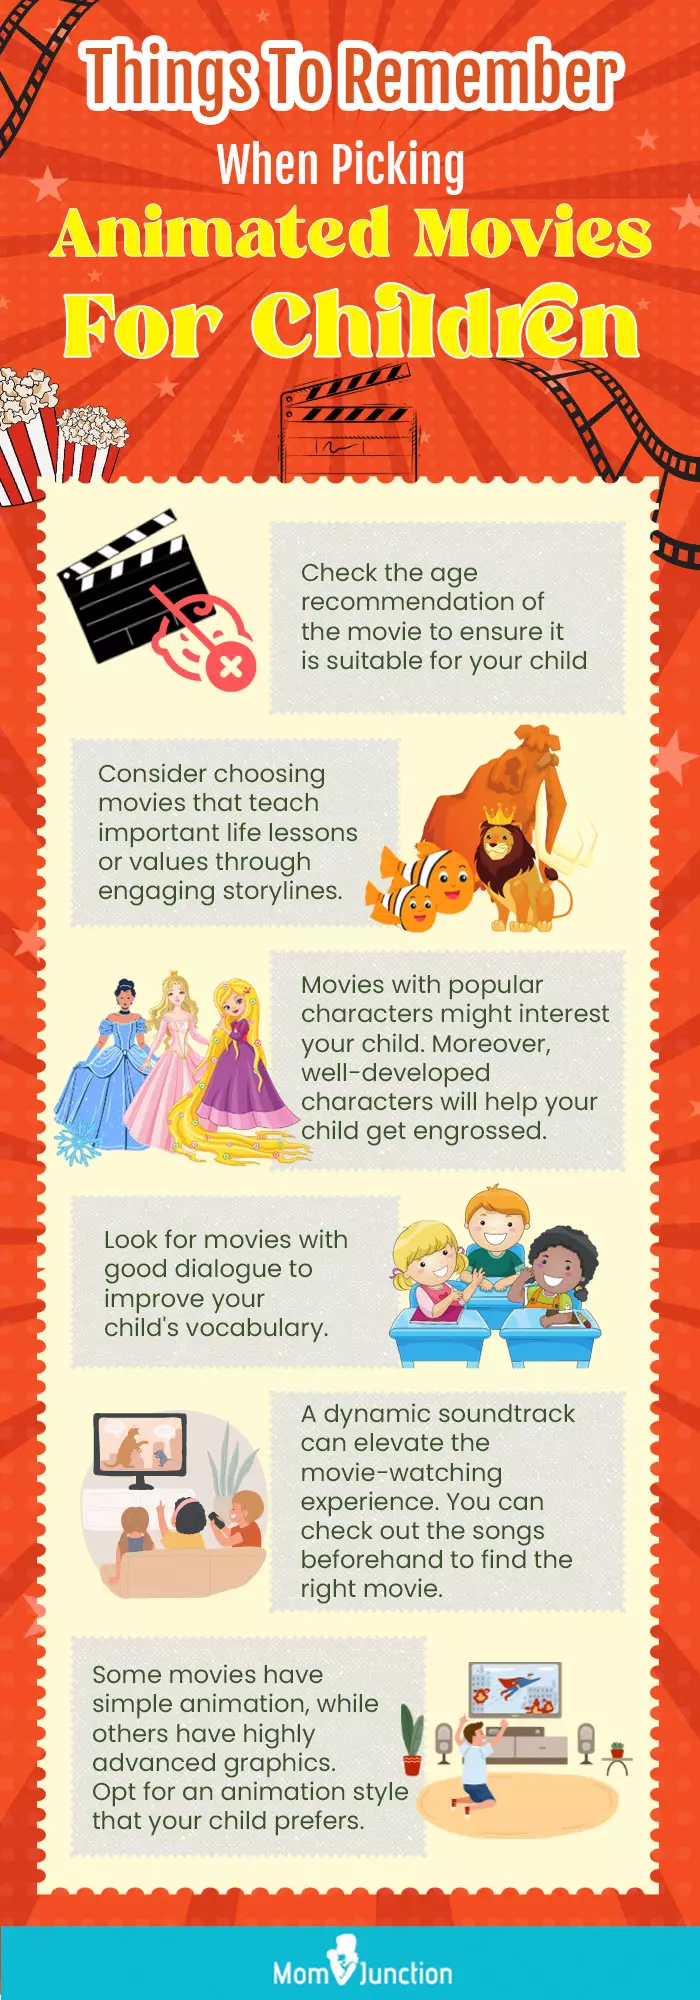 Things To Remember When Picking Animated Movies For Children